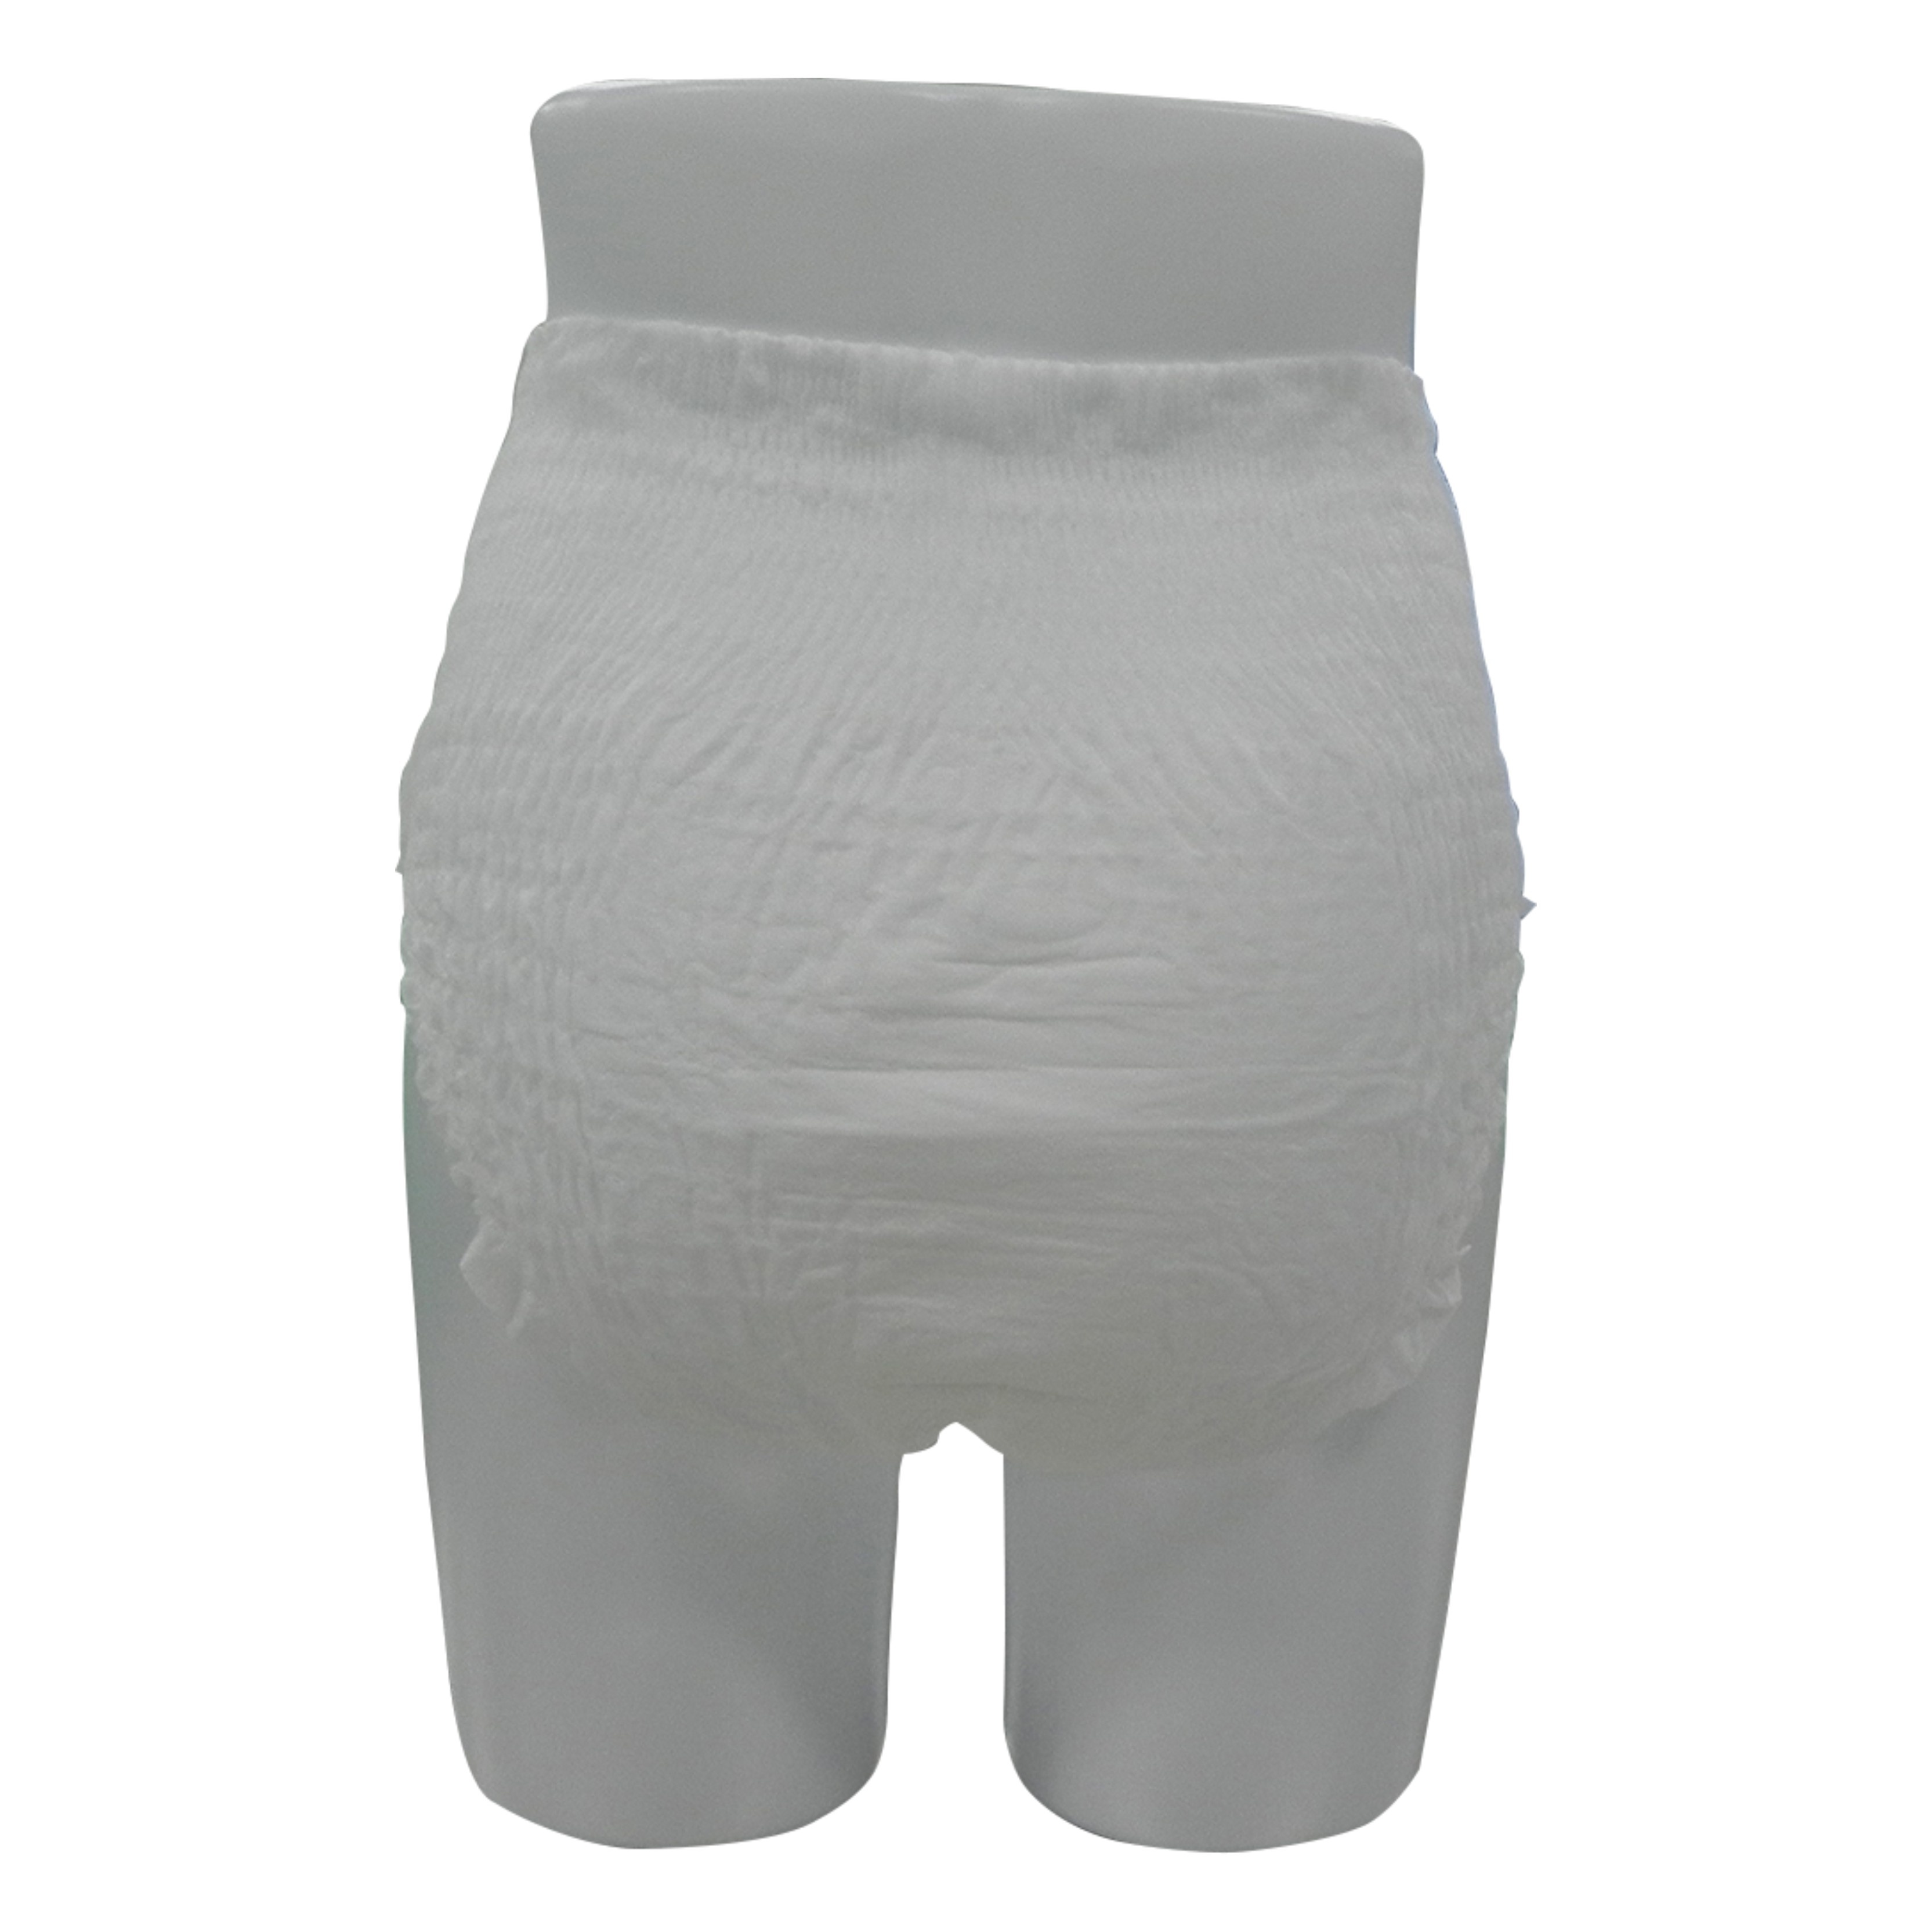 Large absorption incontinence pants